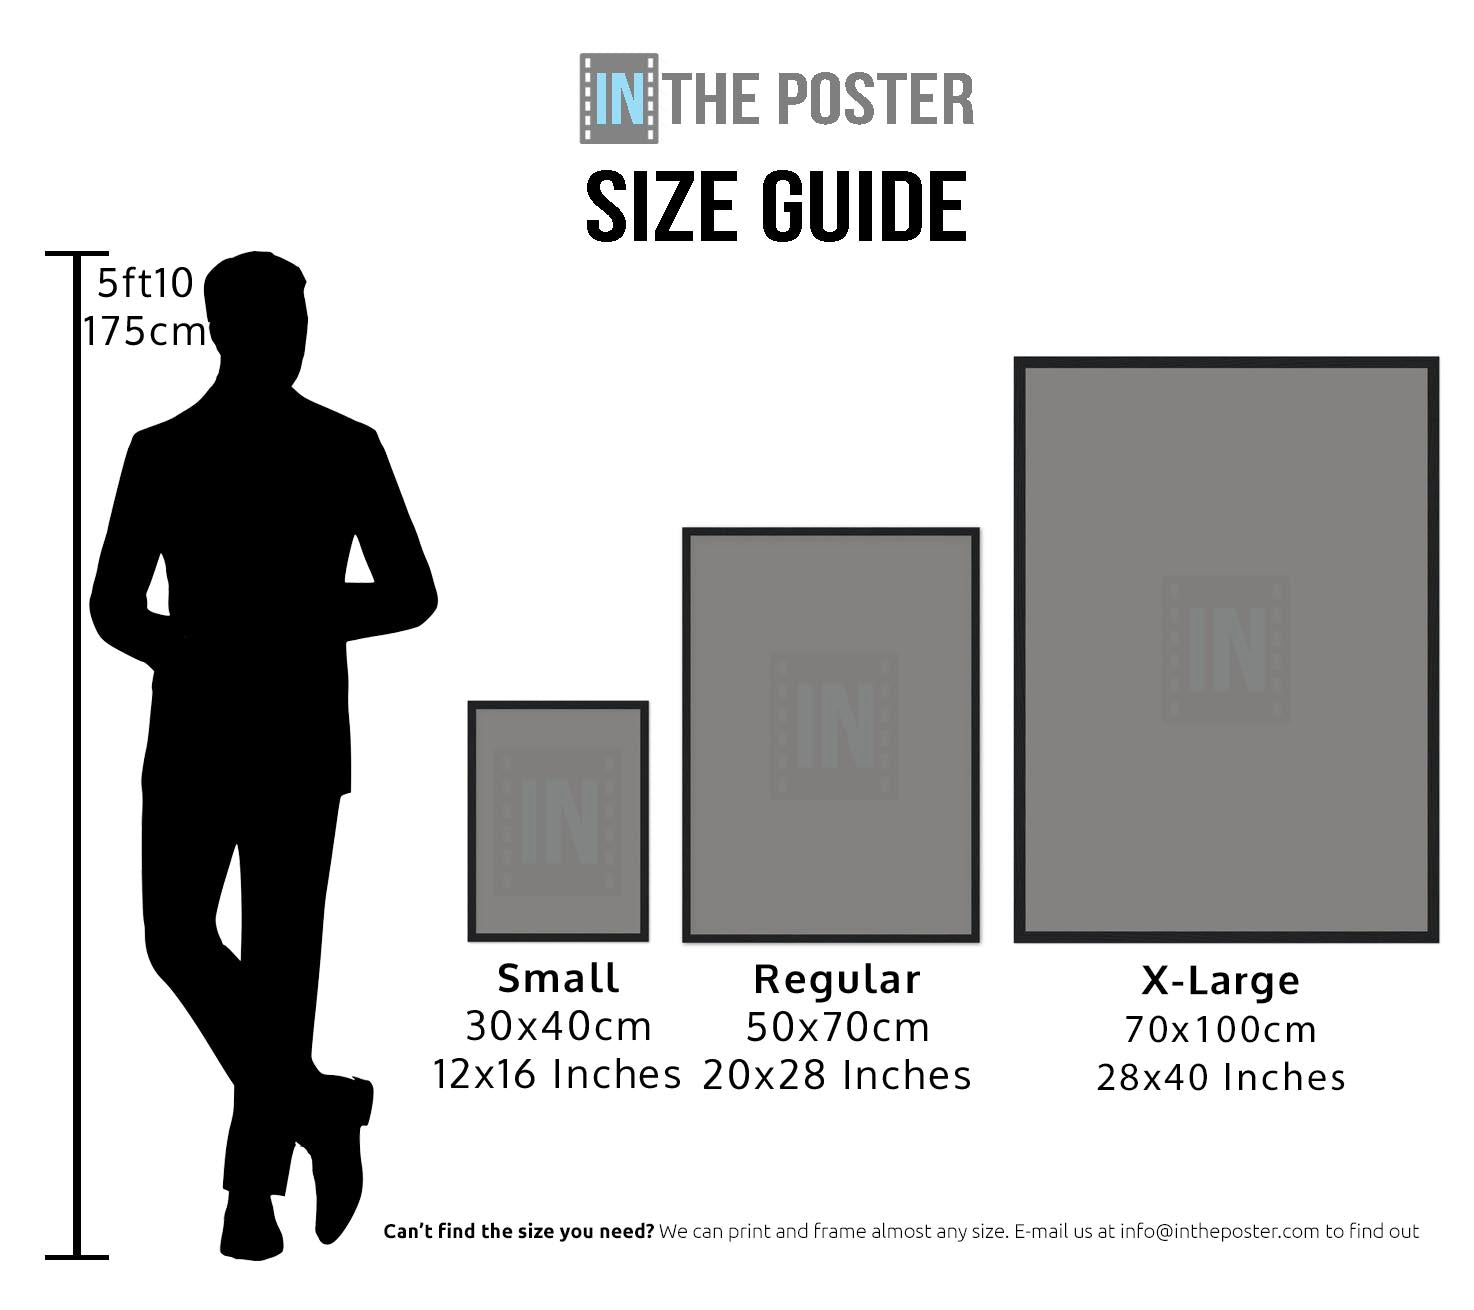 A size guide showing the size of the movie poster options available for purchase on intheposter.com, with small, regular and X-large framed posters alongside a 5ft 10 man as a reference.